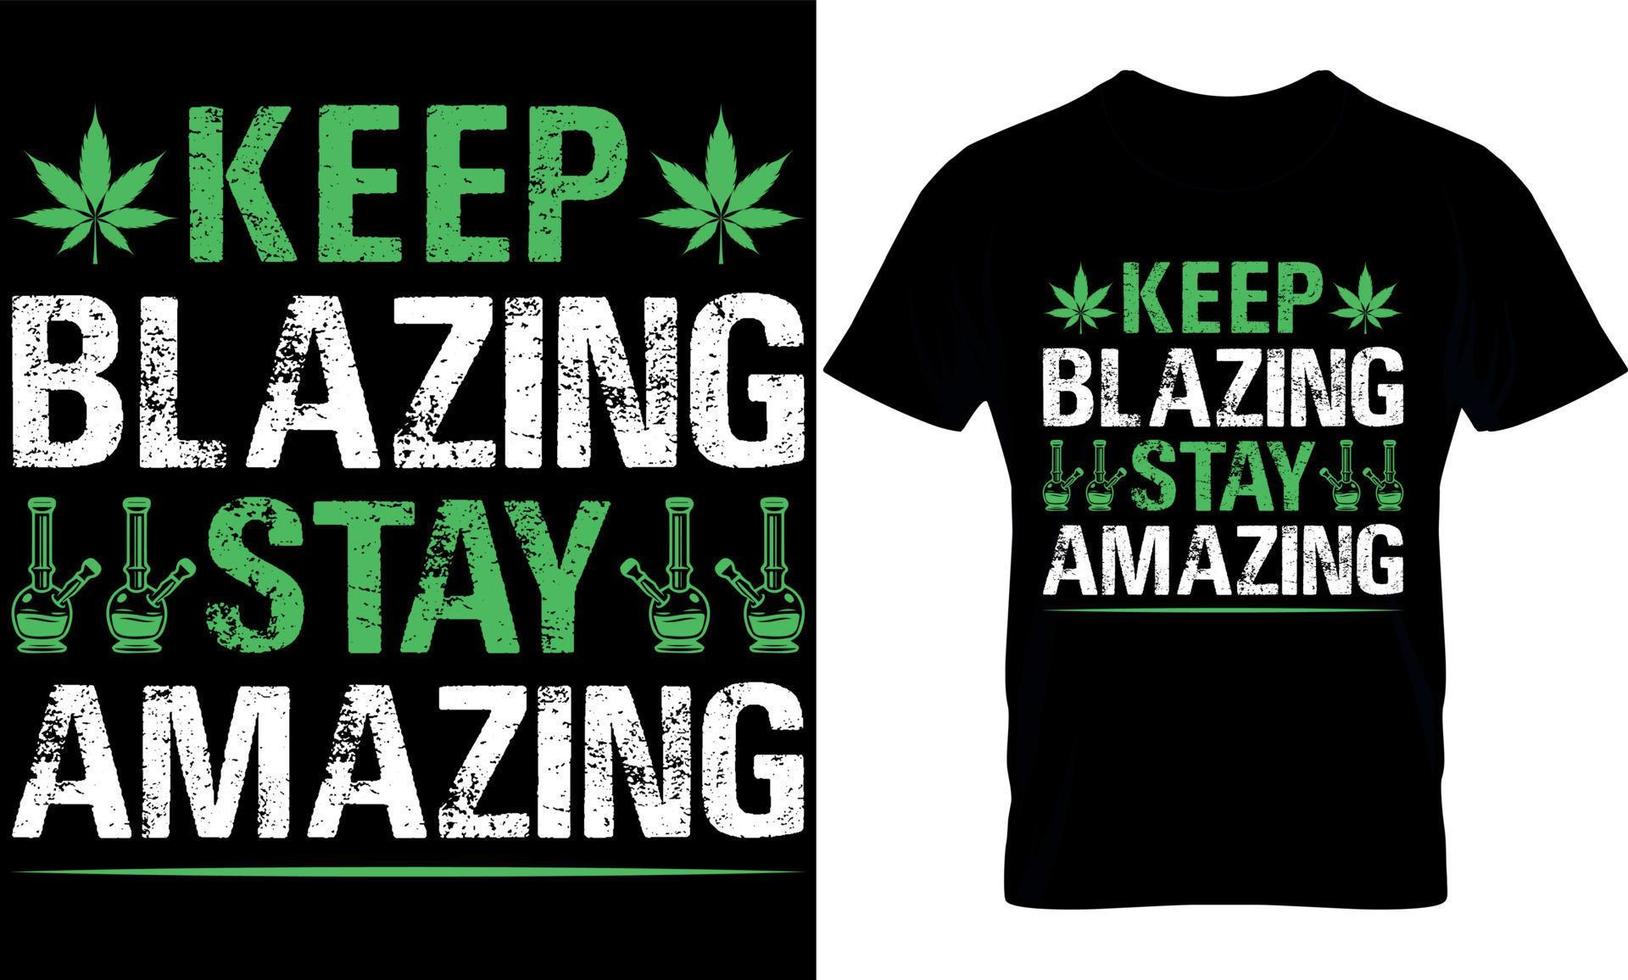 garder brûlant rester incroyable. cannabis typographie t chemise conception. cannabis T-shirt conception. cannabis t chemise conception. cannabis T-shirt conception. cannabis t chemise conception. cannabis conception. vecteur